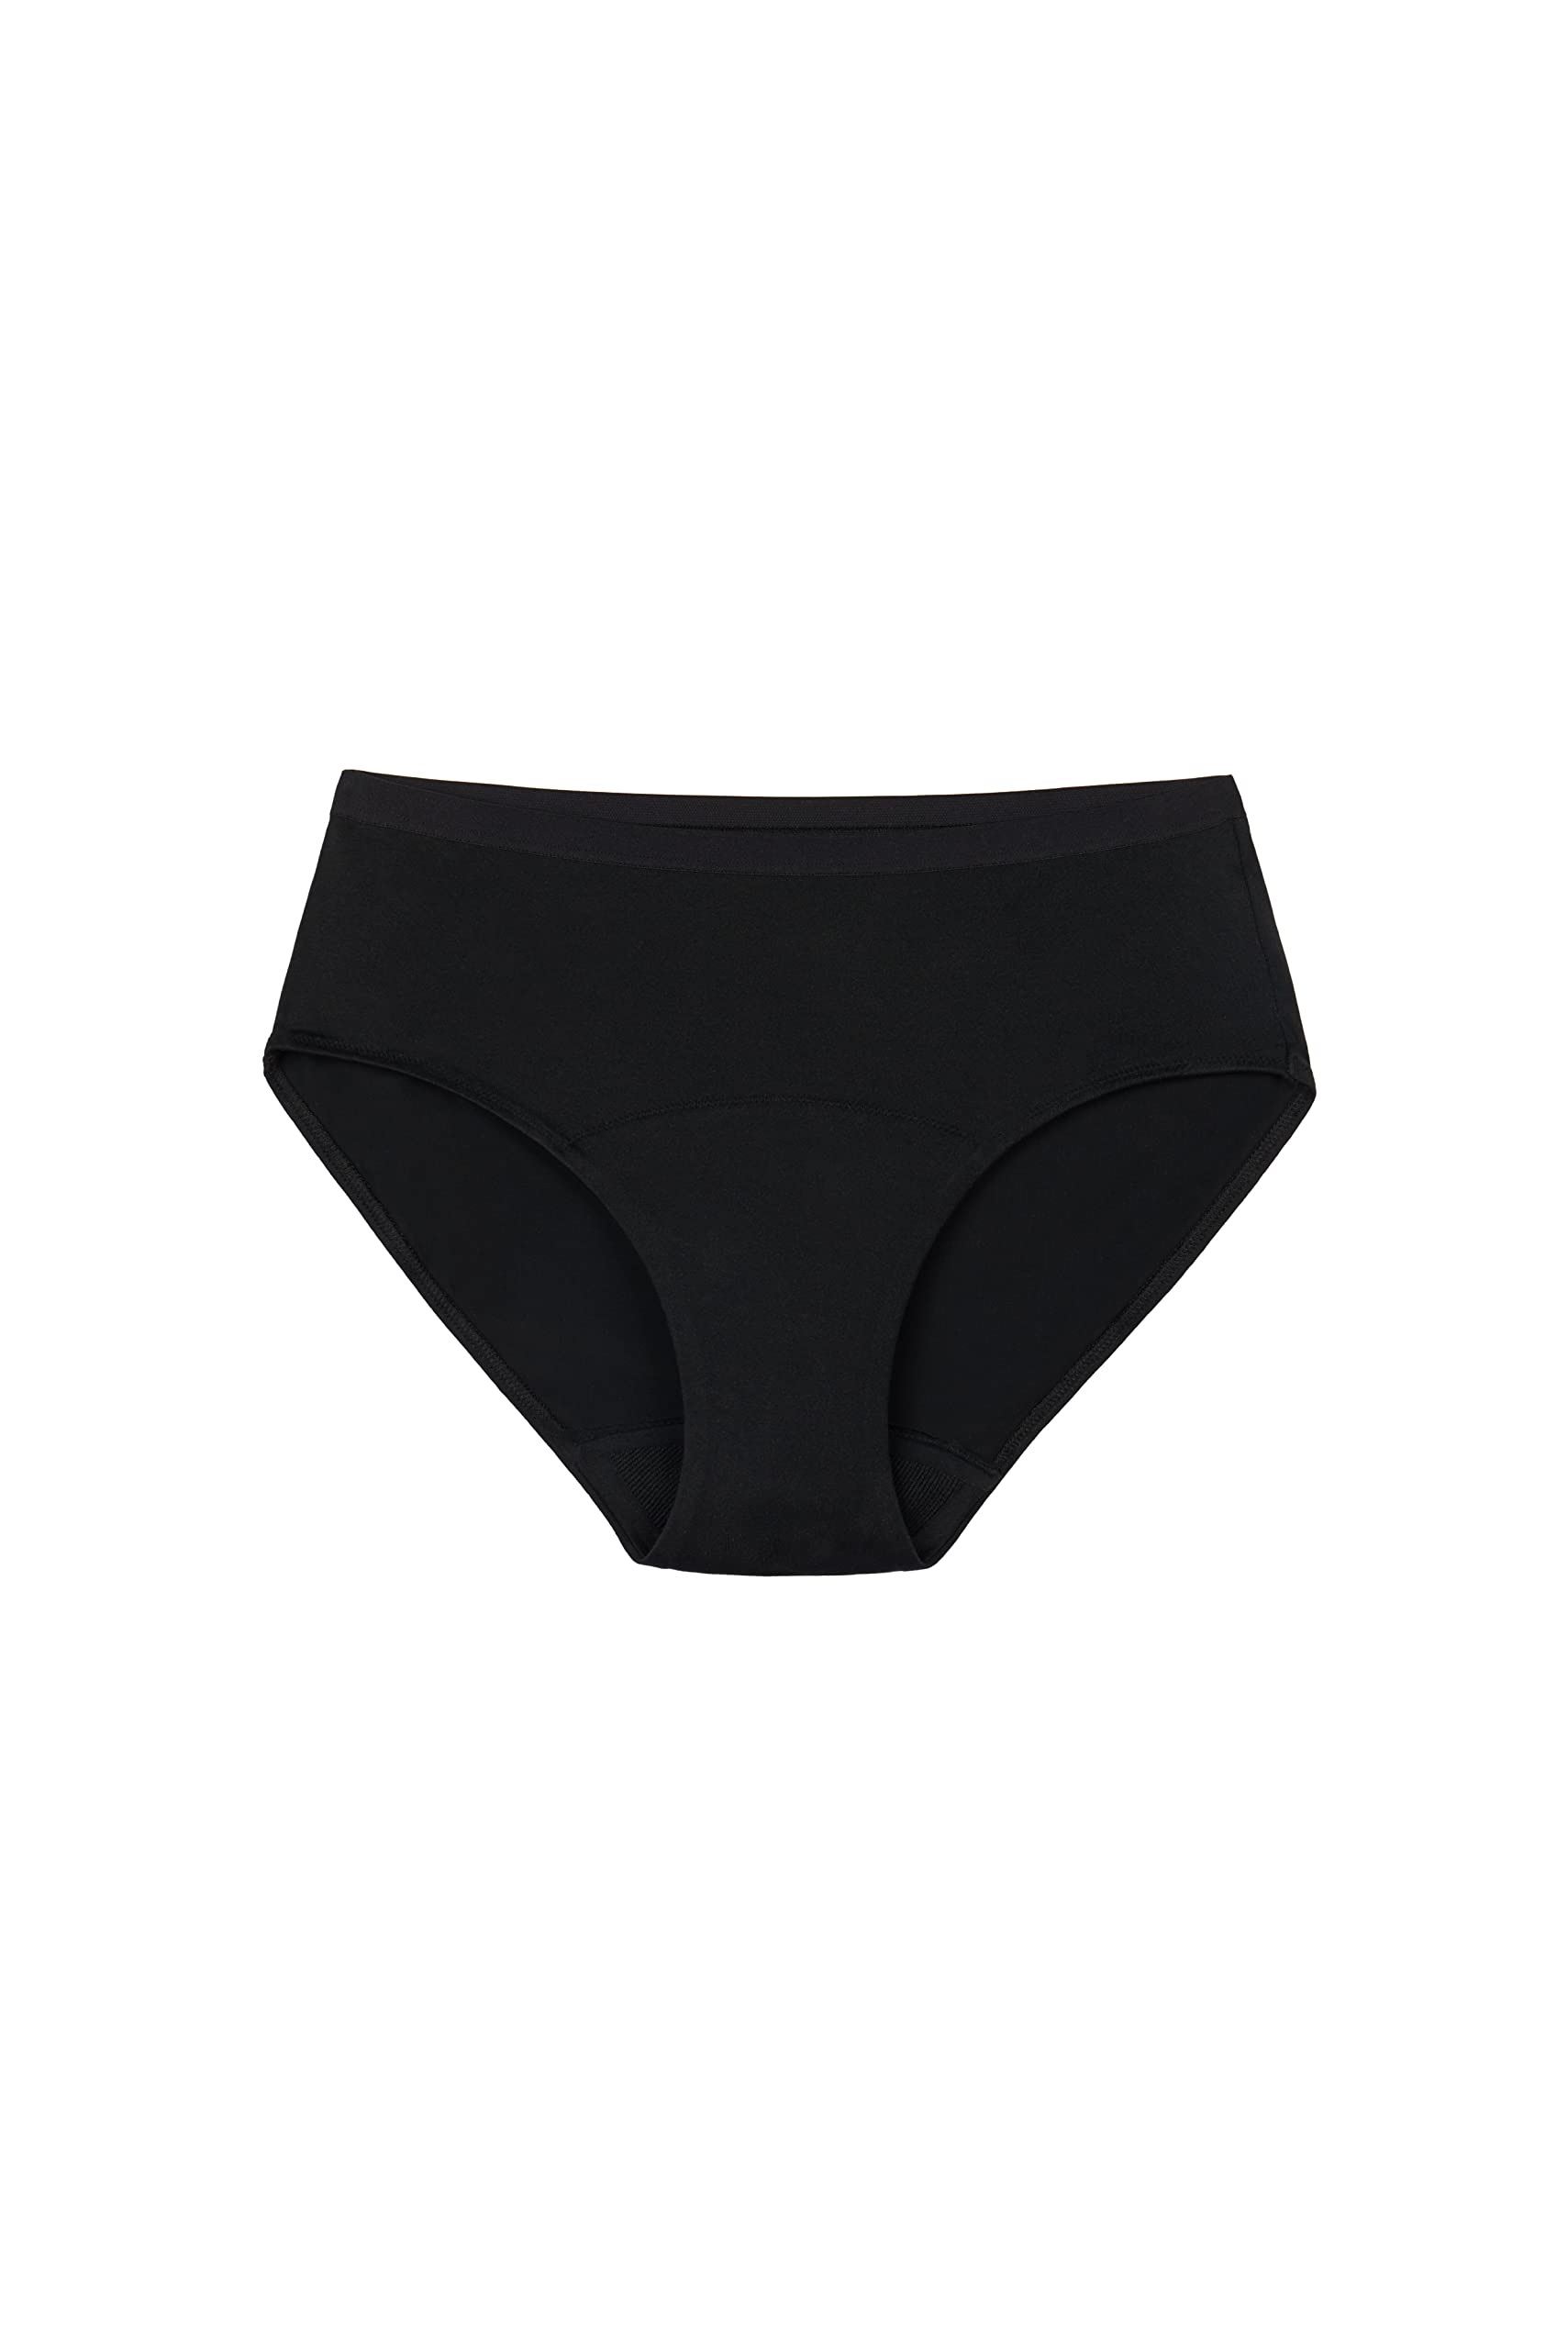  Speax by Thinx Thong Incontinence Underwear for Women